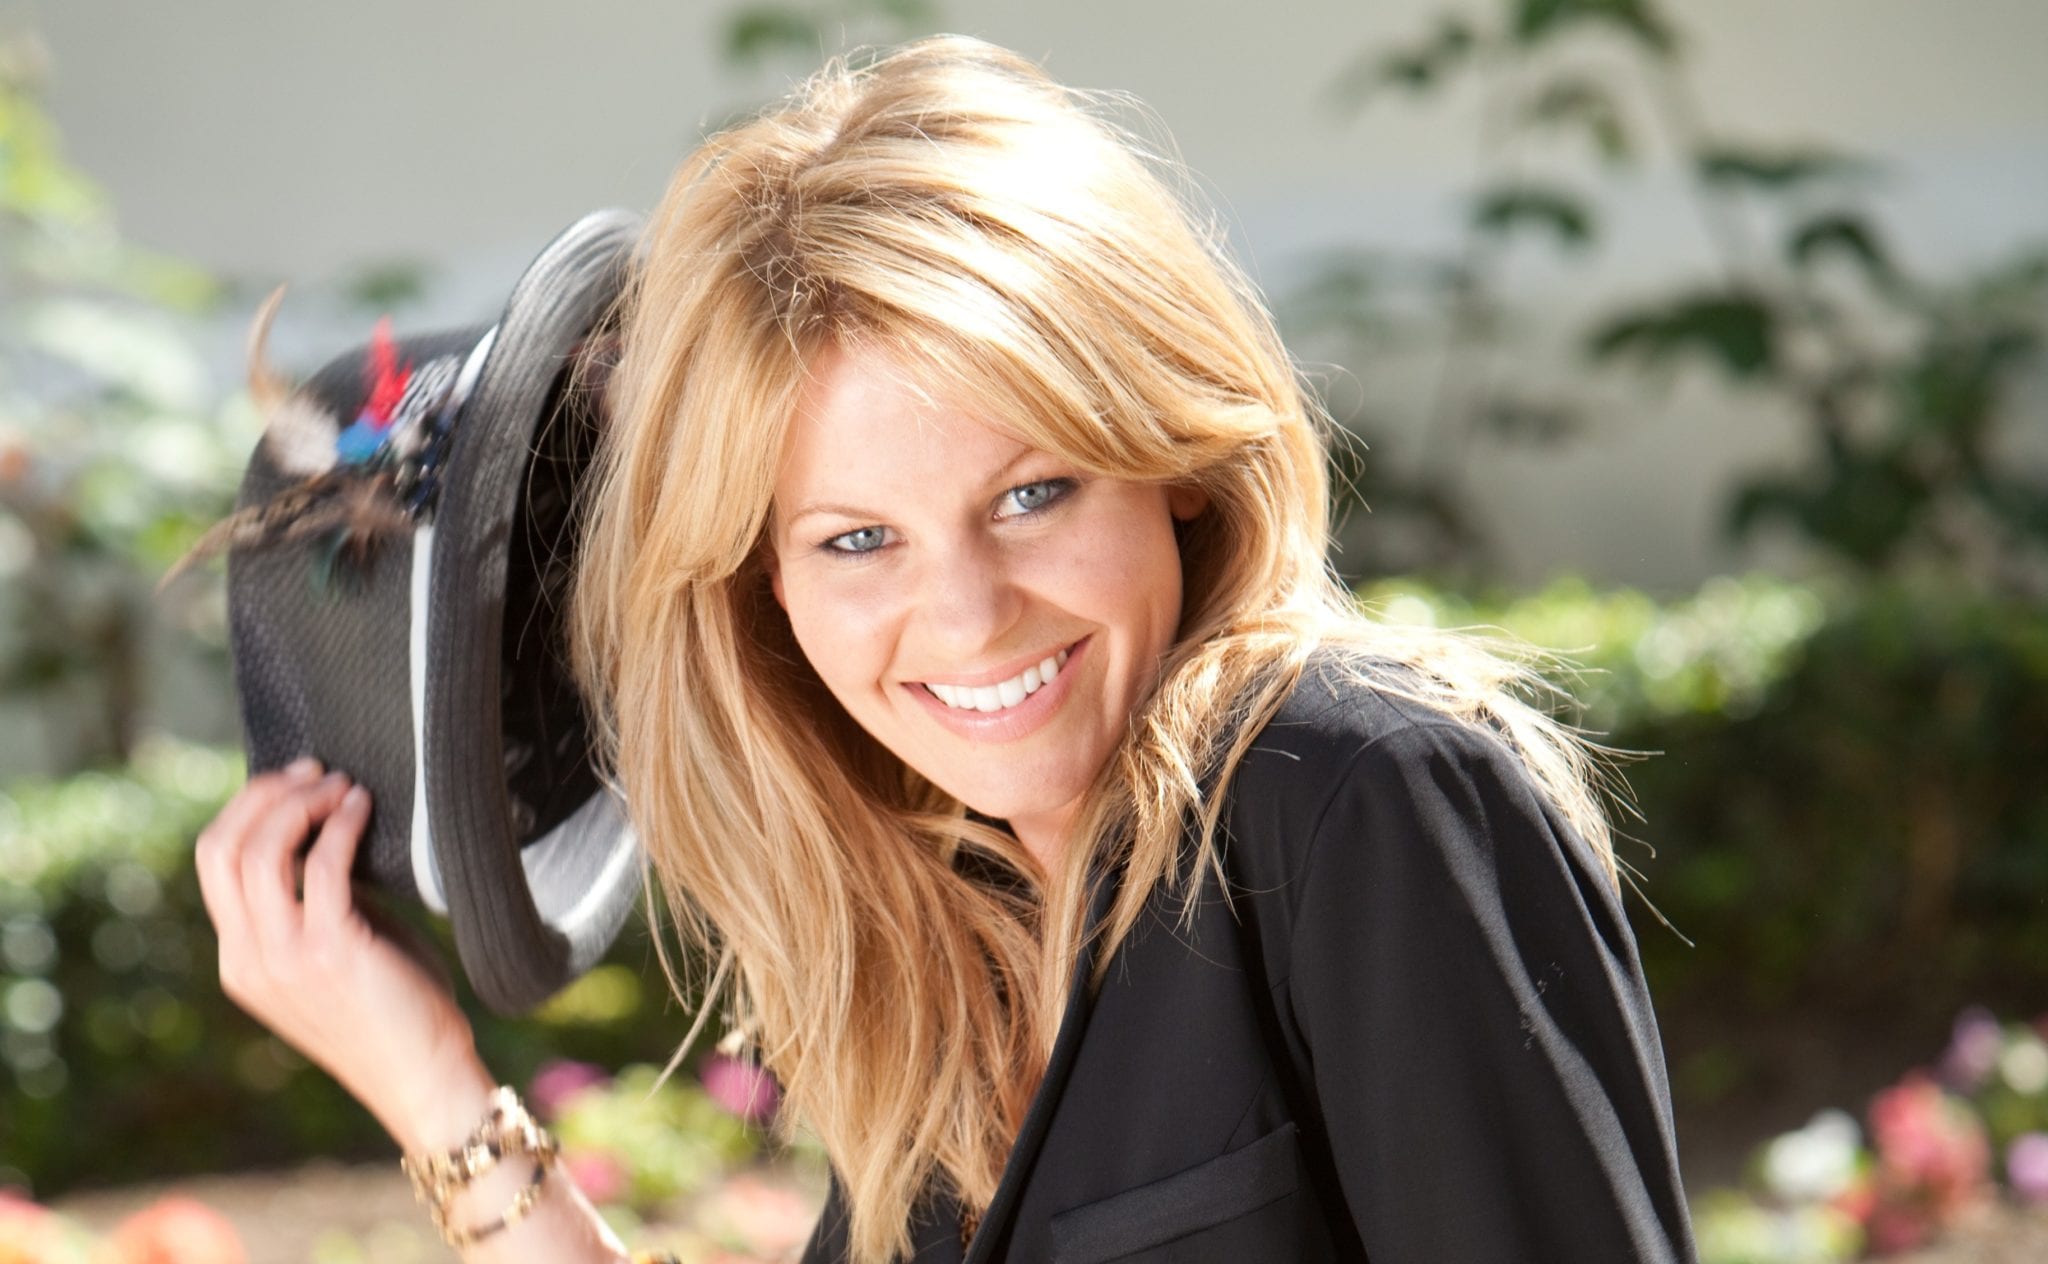 Candace Cameron Bure’s Full House of Fun, Love and Priorities